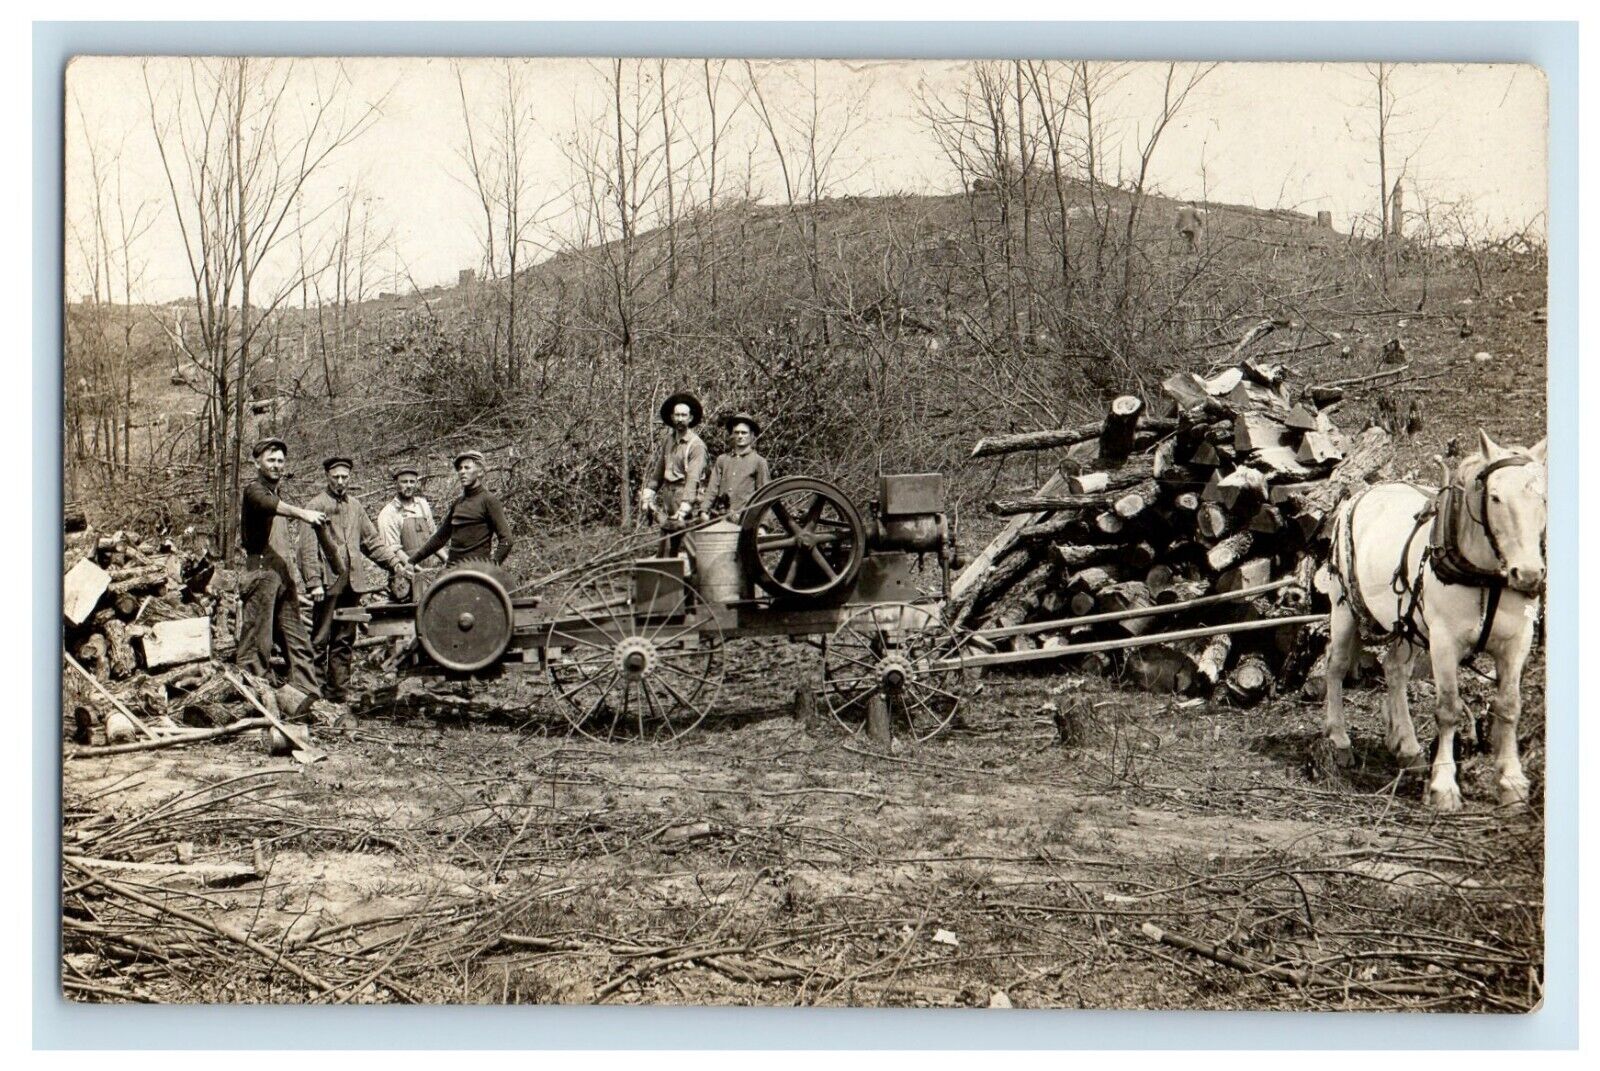 c1910's Horse Workers Loggers Logging Saw Axe Machine RPPC Photo Postcard